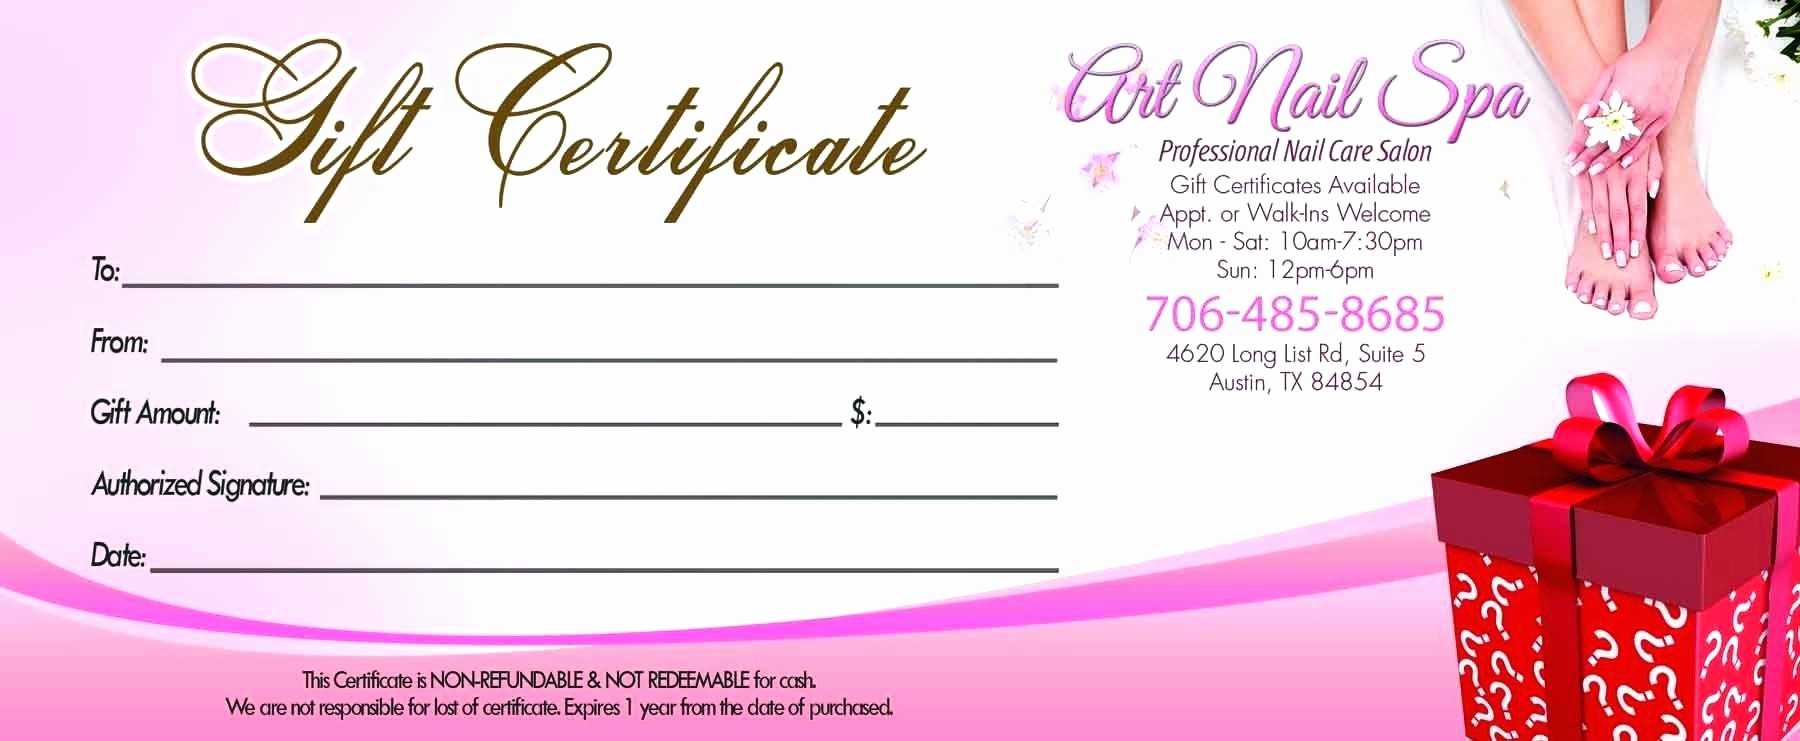 001 Salon Gift Certificate Templates Free Printable Hair Within Walking Certificate Templates